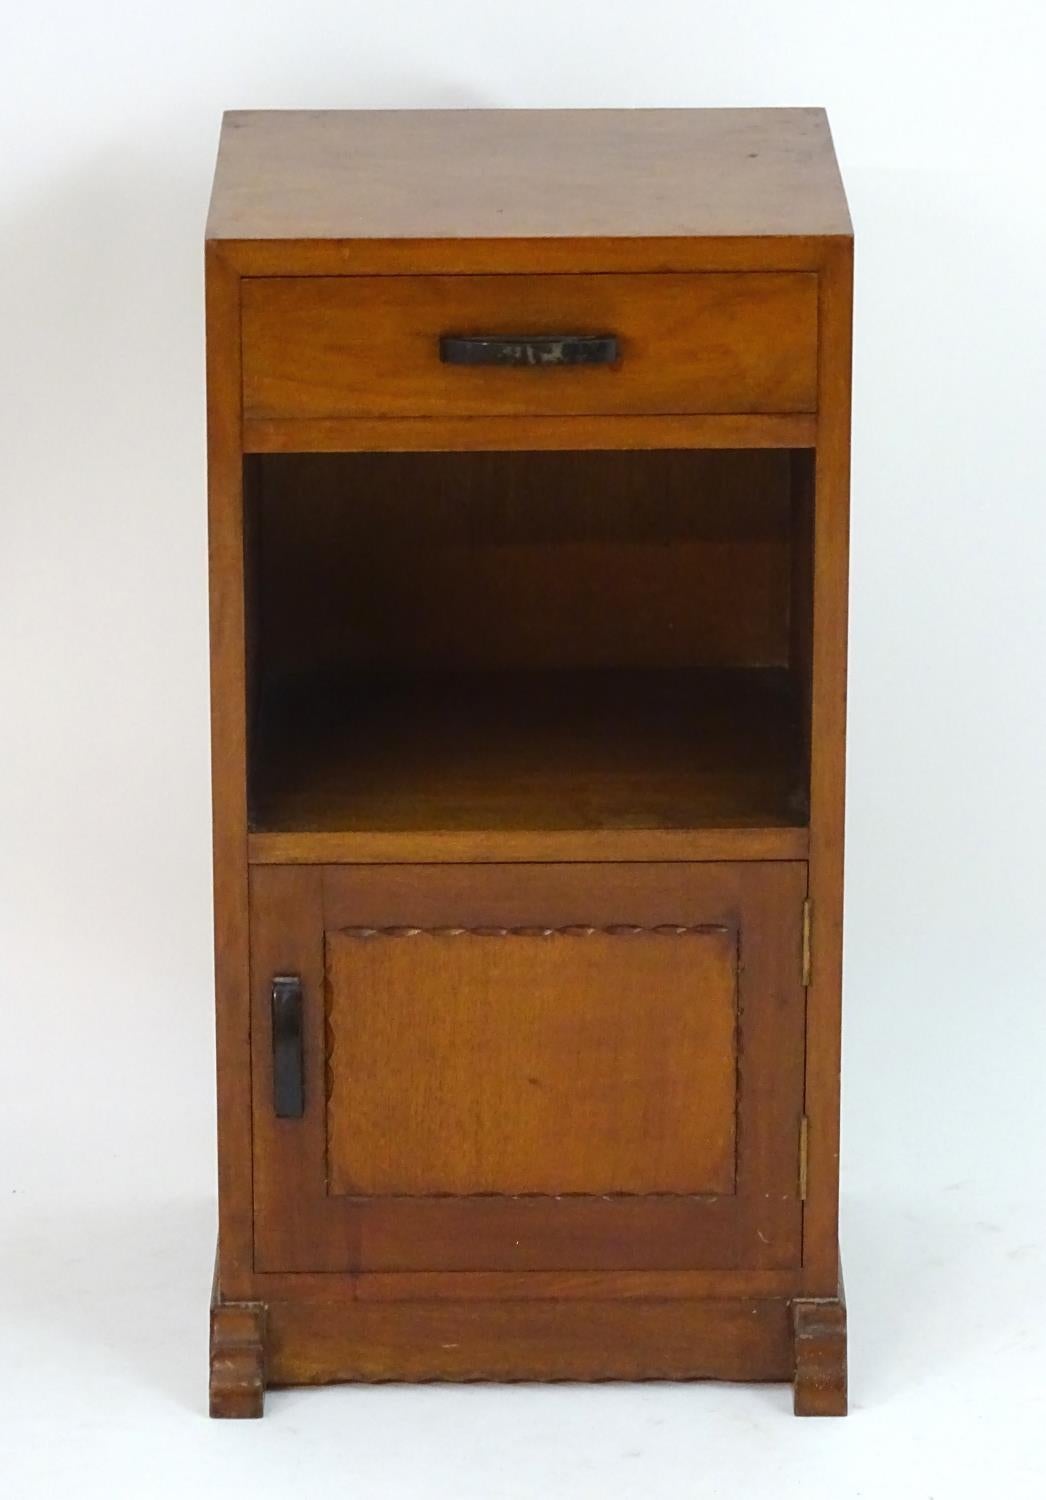 Romney Green, in the style of.
An Arts & Crafts Cotswold School walnut bedside cabinet with a single drawer, an open area below and a chip carved door with ebonized handles, on shaped feet with a subtle carved details.